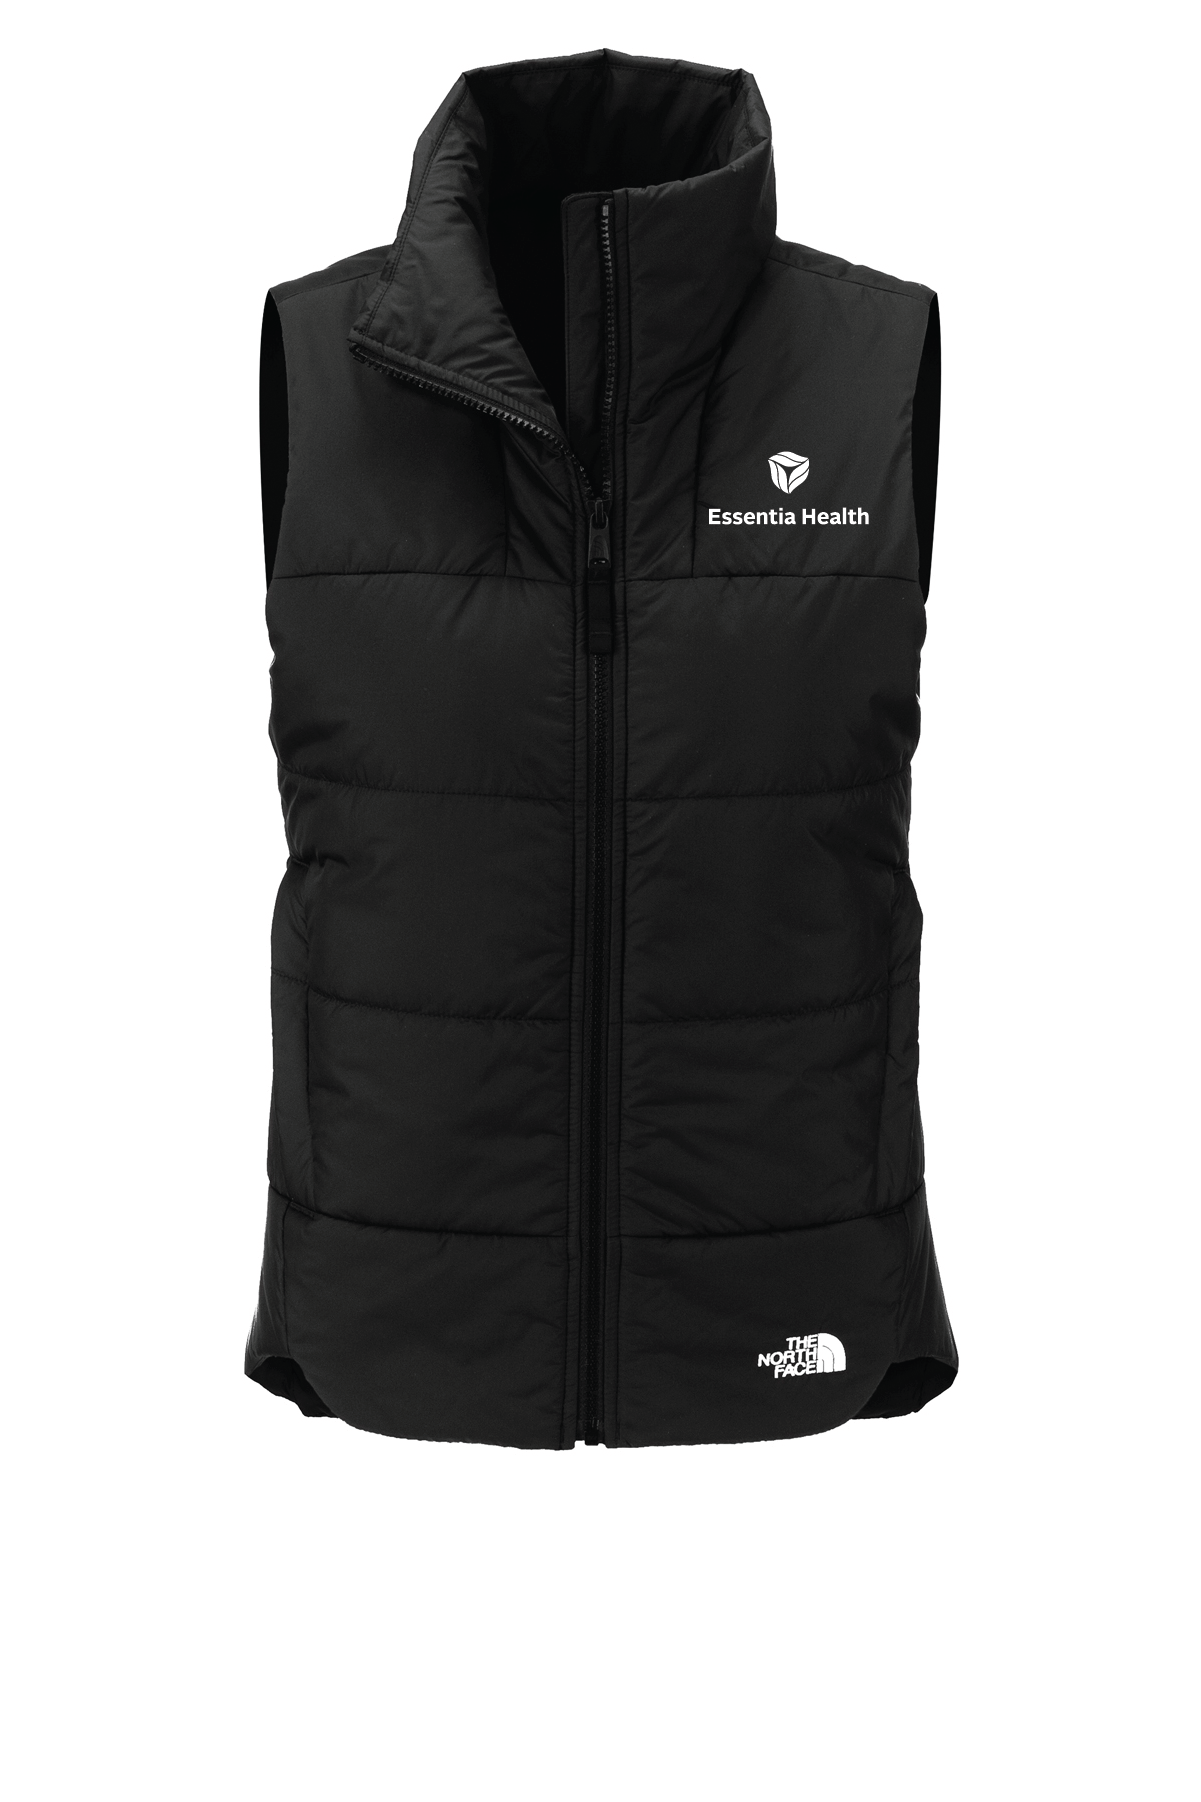 Essentia Health The North Face Ladies Everyday Insulated Vest - DSP On Demand